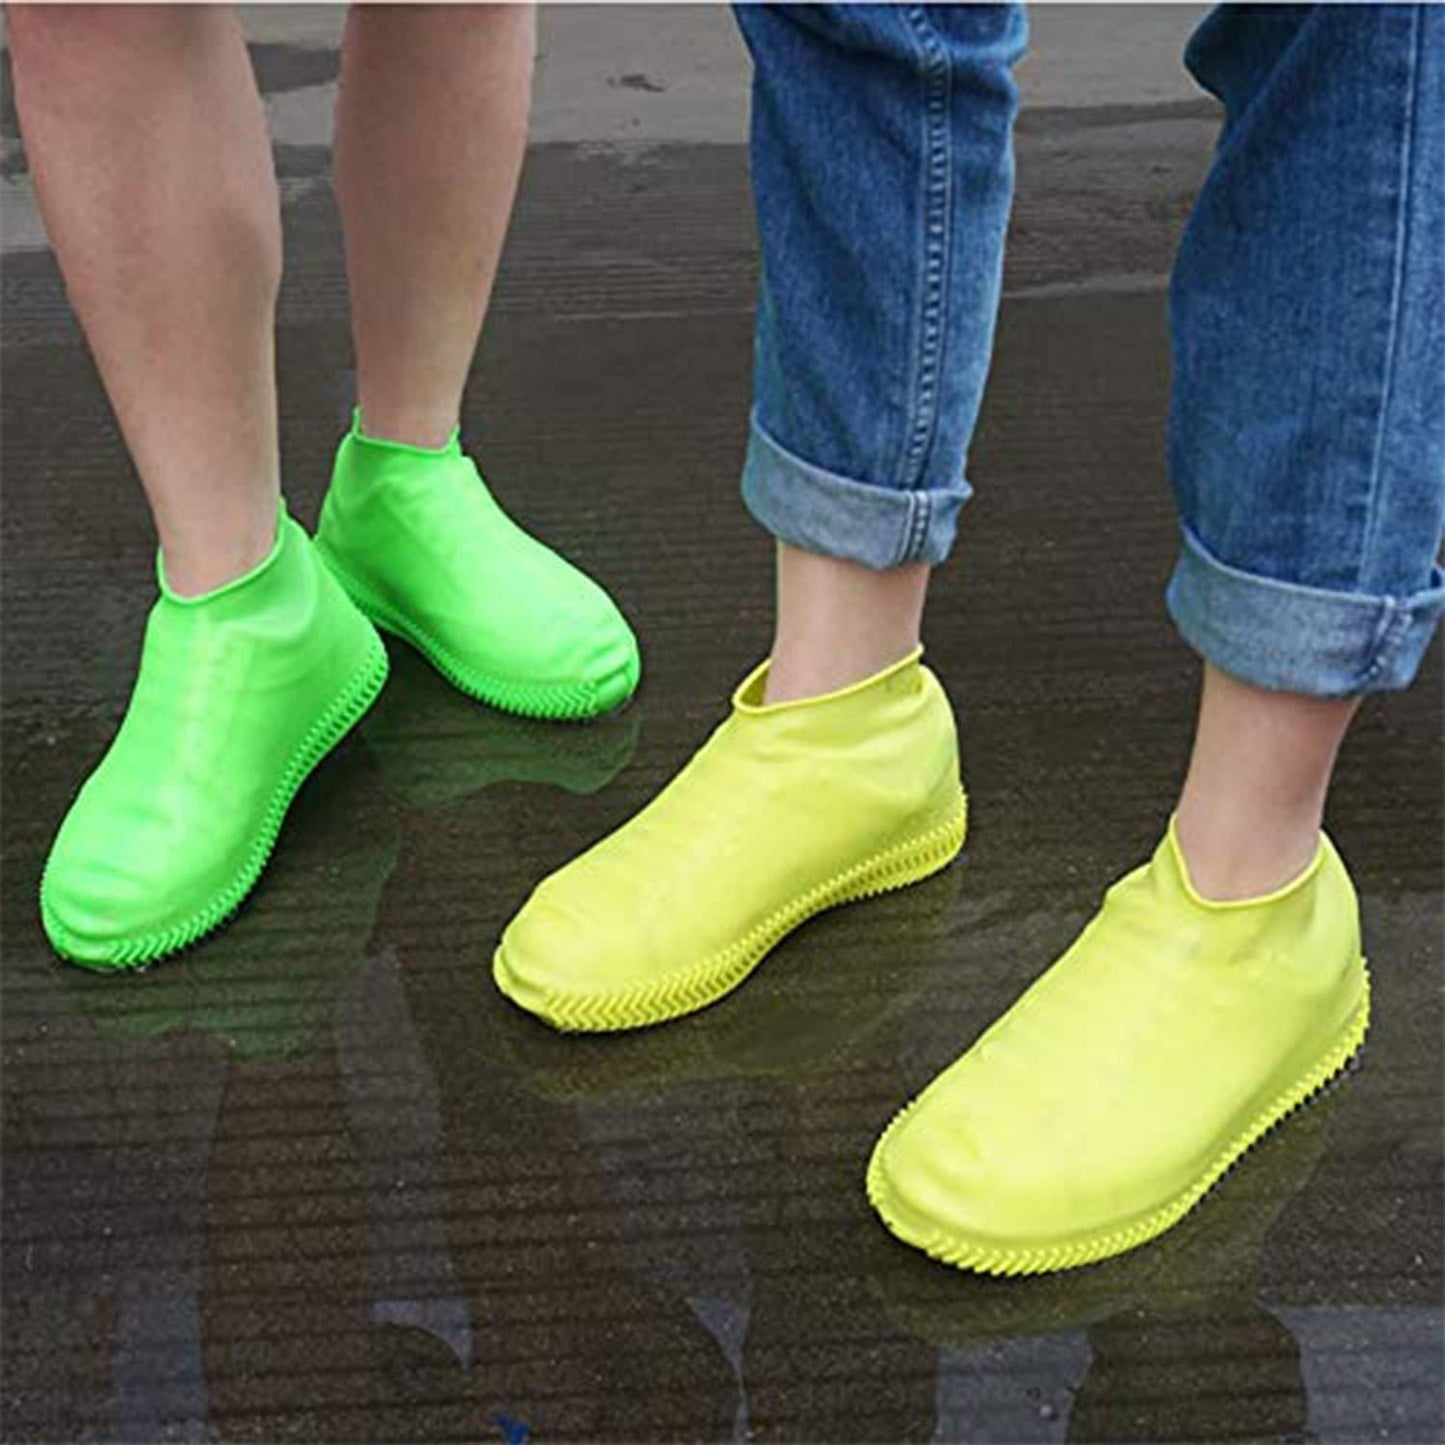 Shoe Cover-Silicone Reusable Anti skid Waterproof Boot Cover Shoe Protector